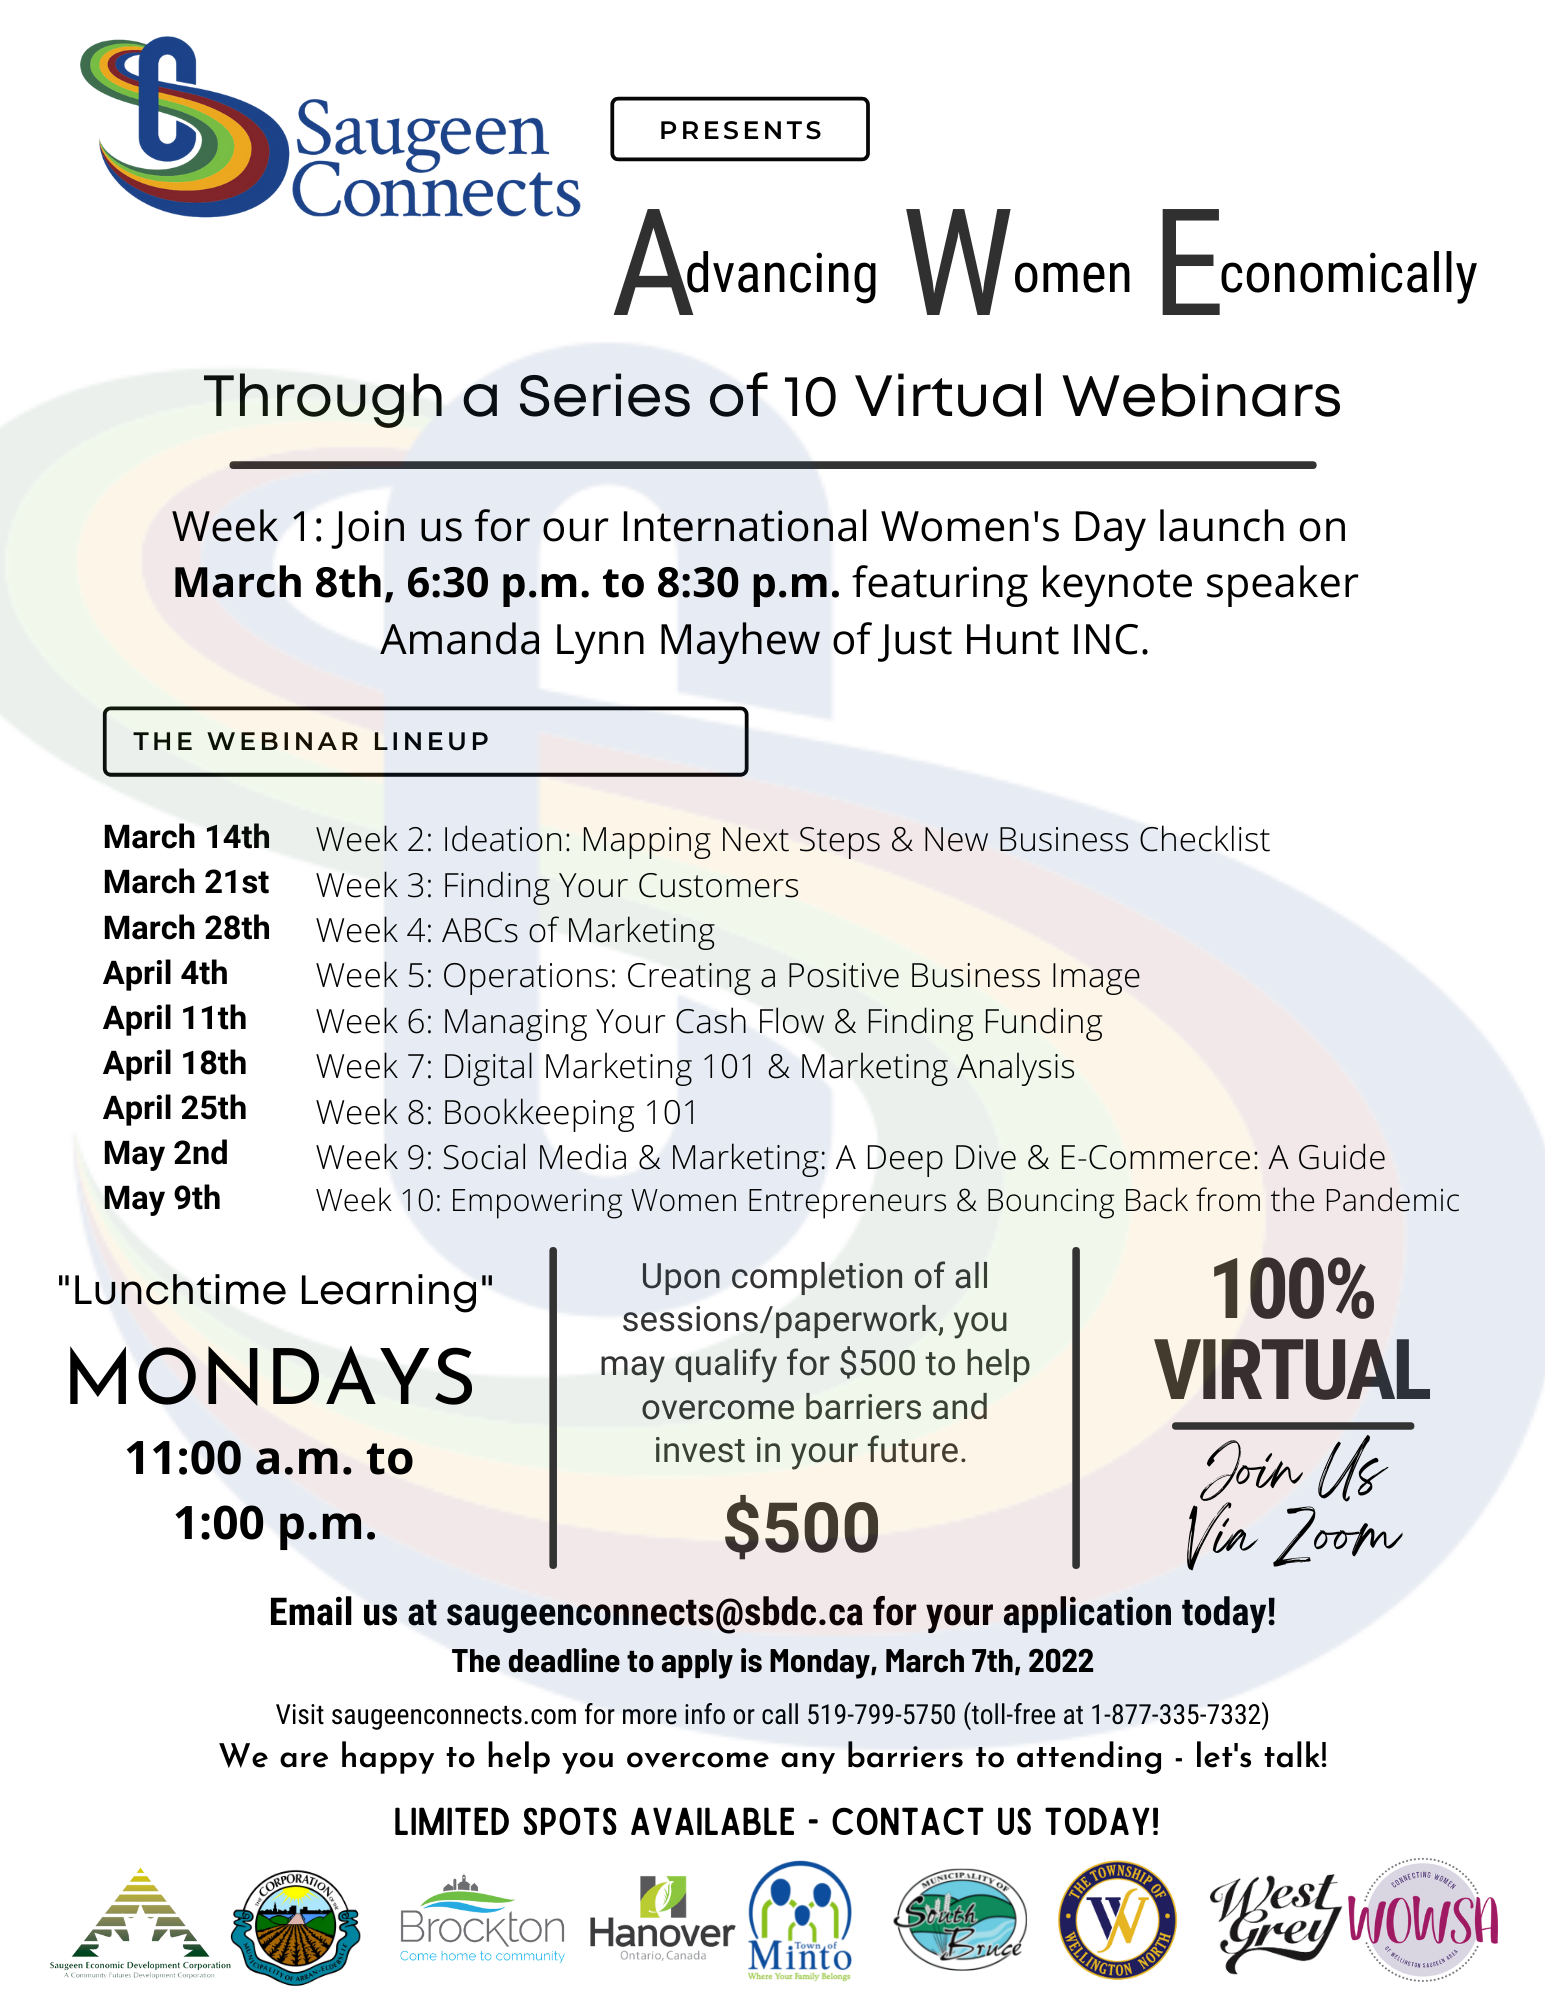 Saugeen Connects Advancing Women Economically Series